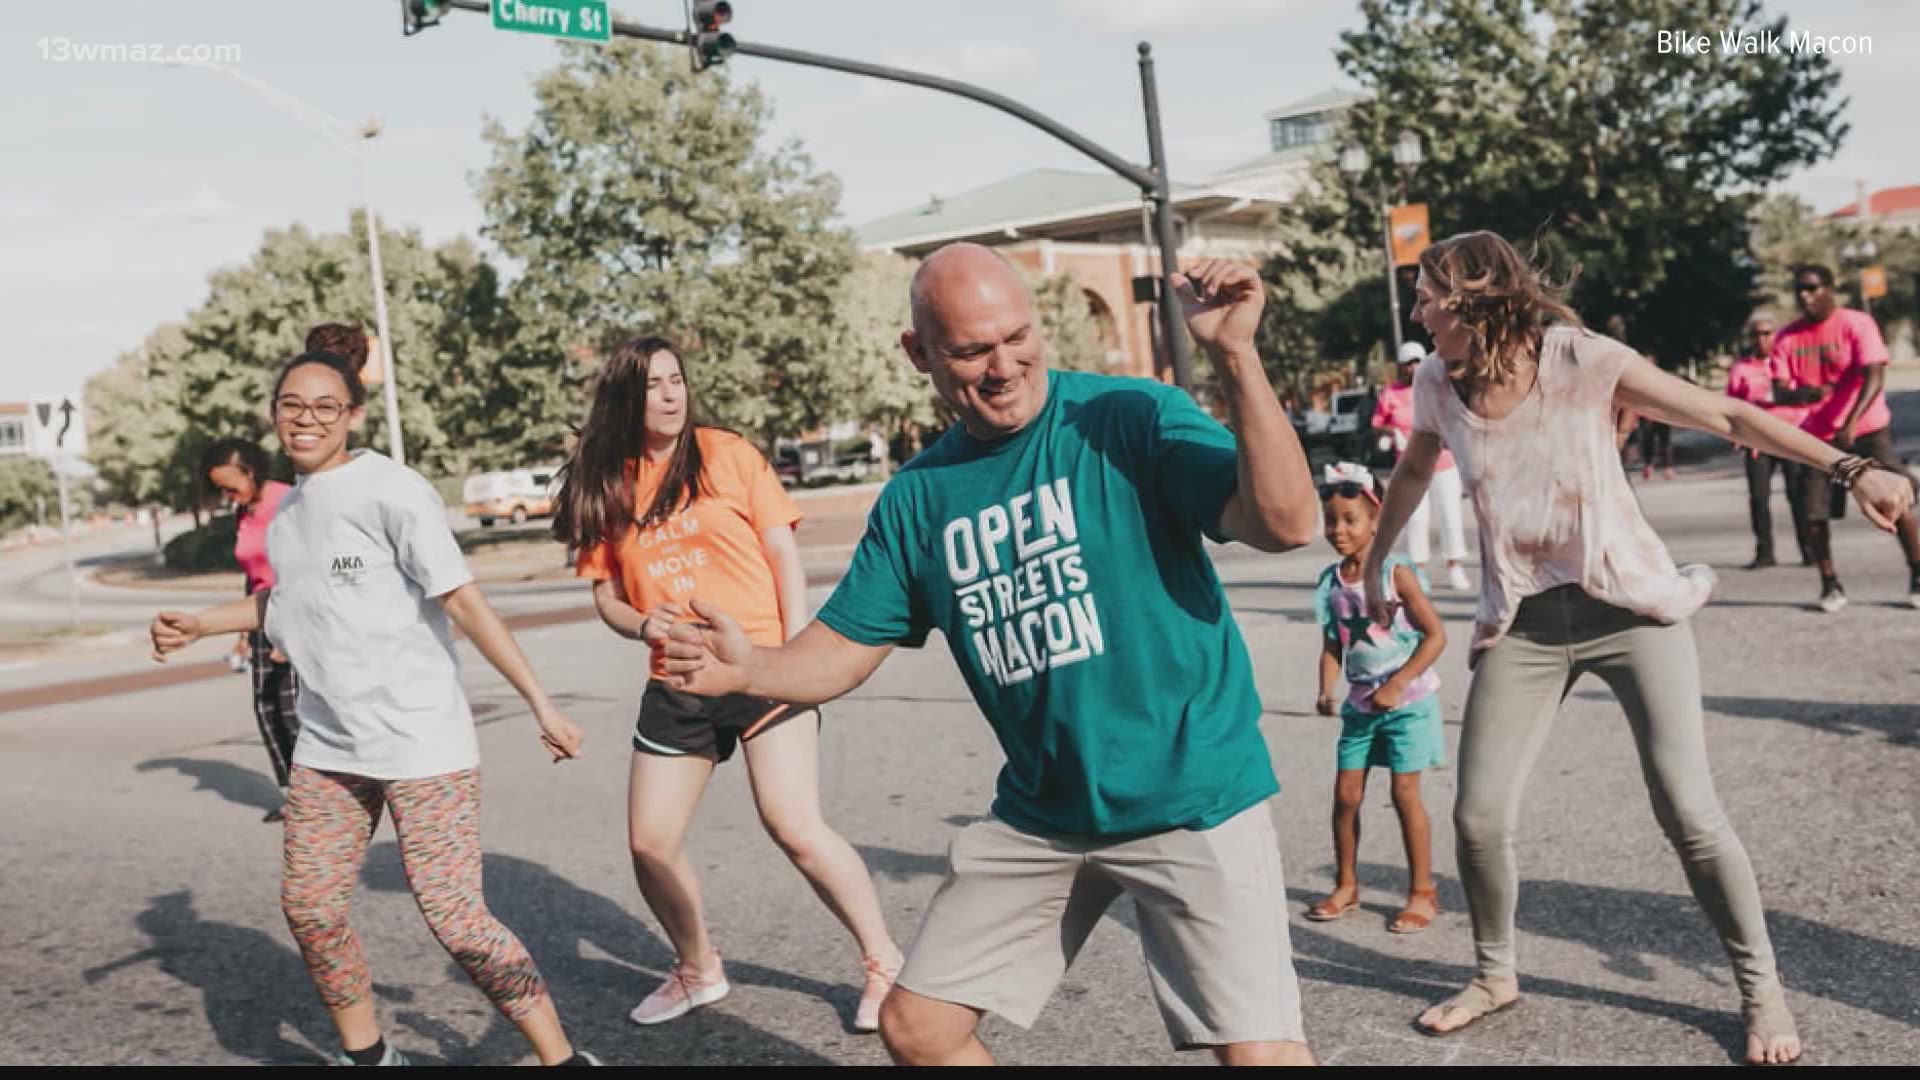 Open Streets Macon will once again to show you a world without cars, and this year the event will look a little different.